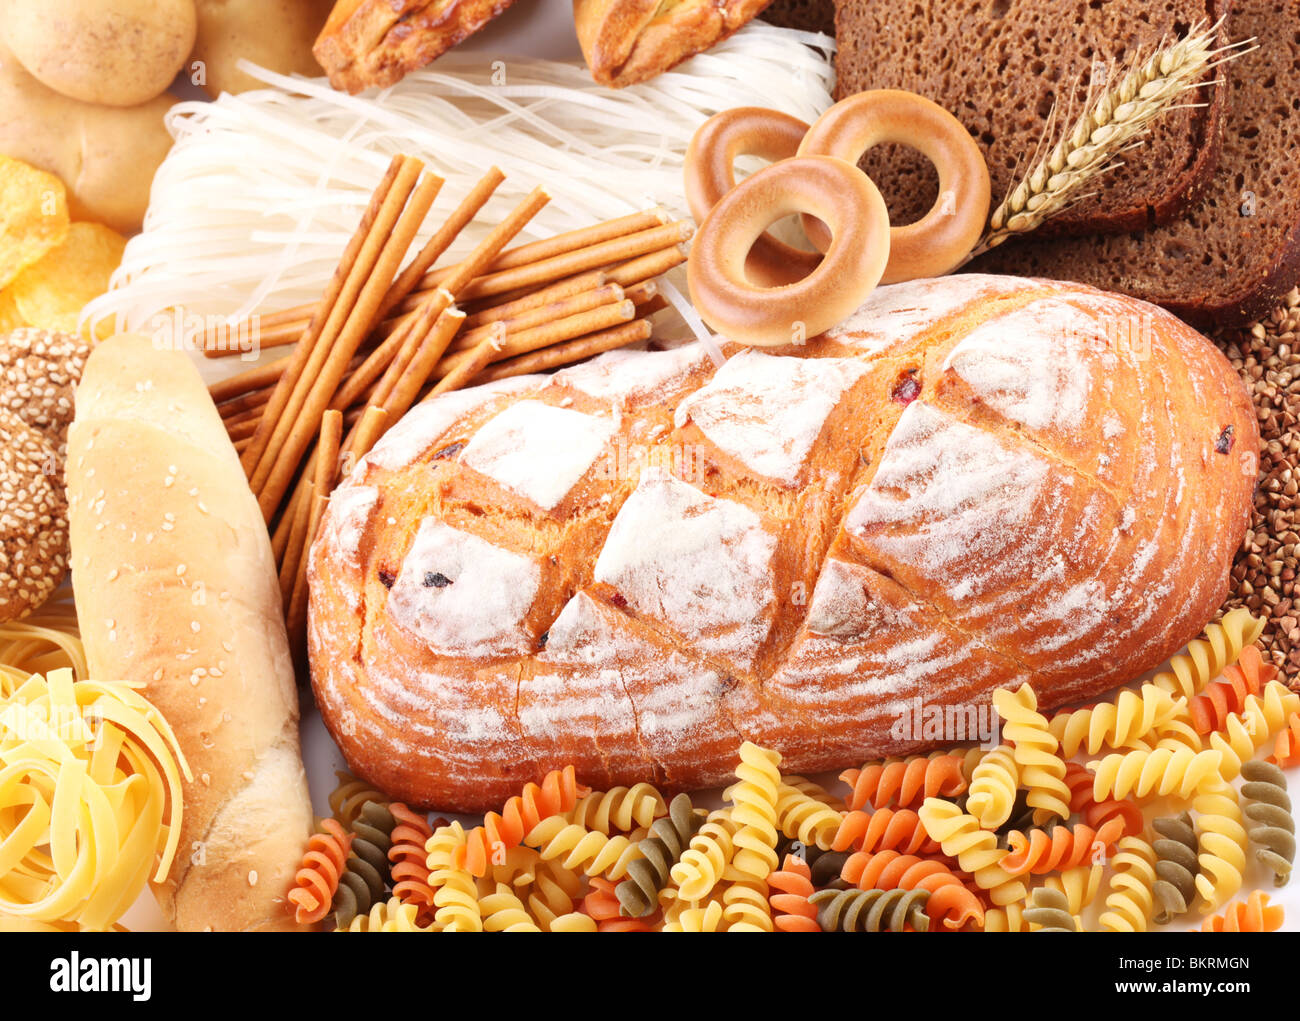 With bakery products Stock Photo